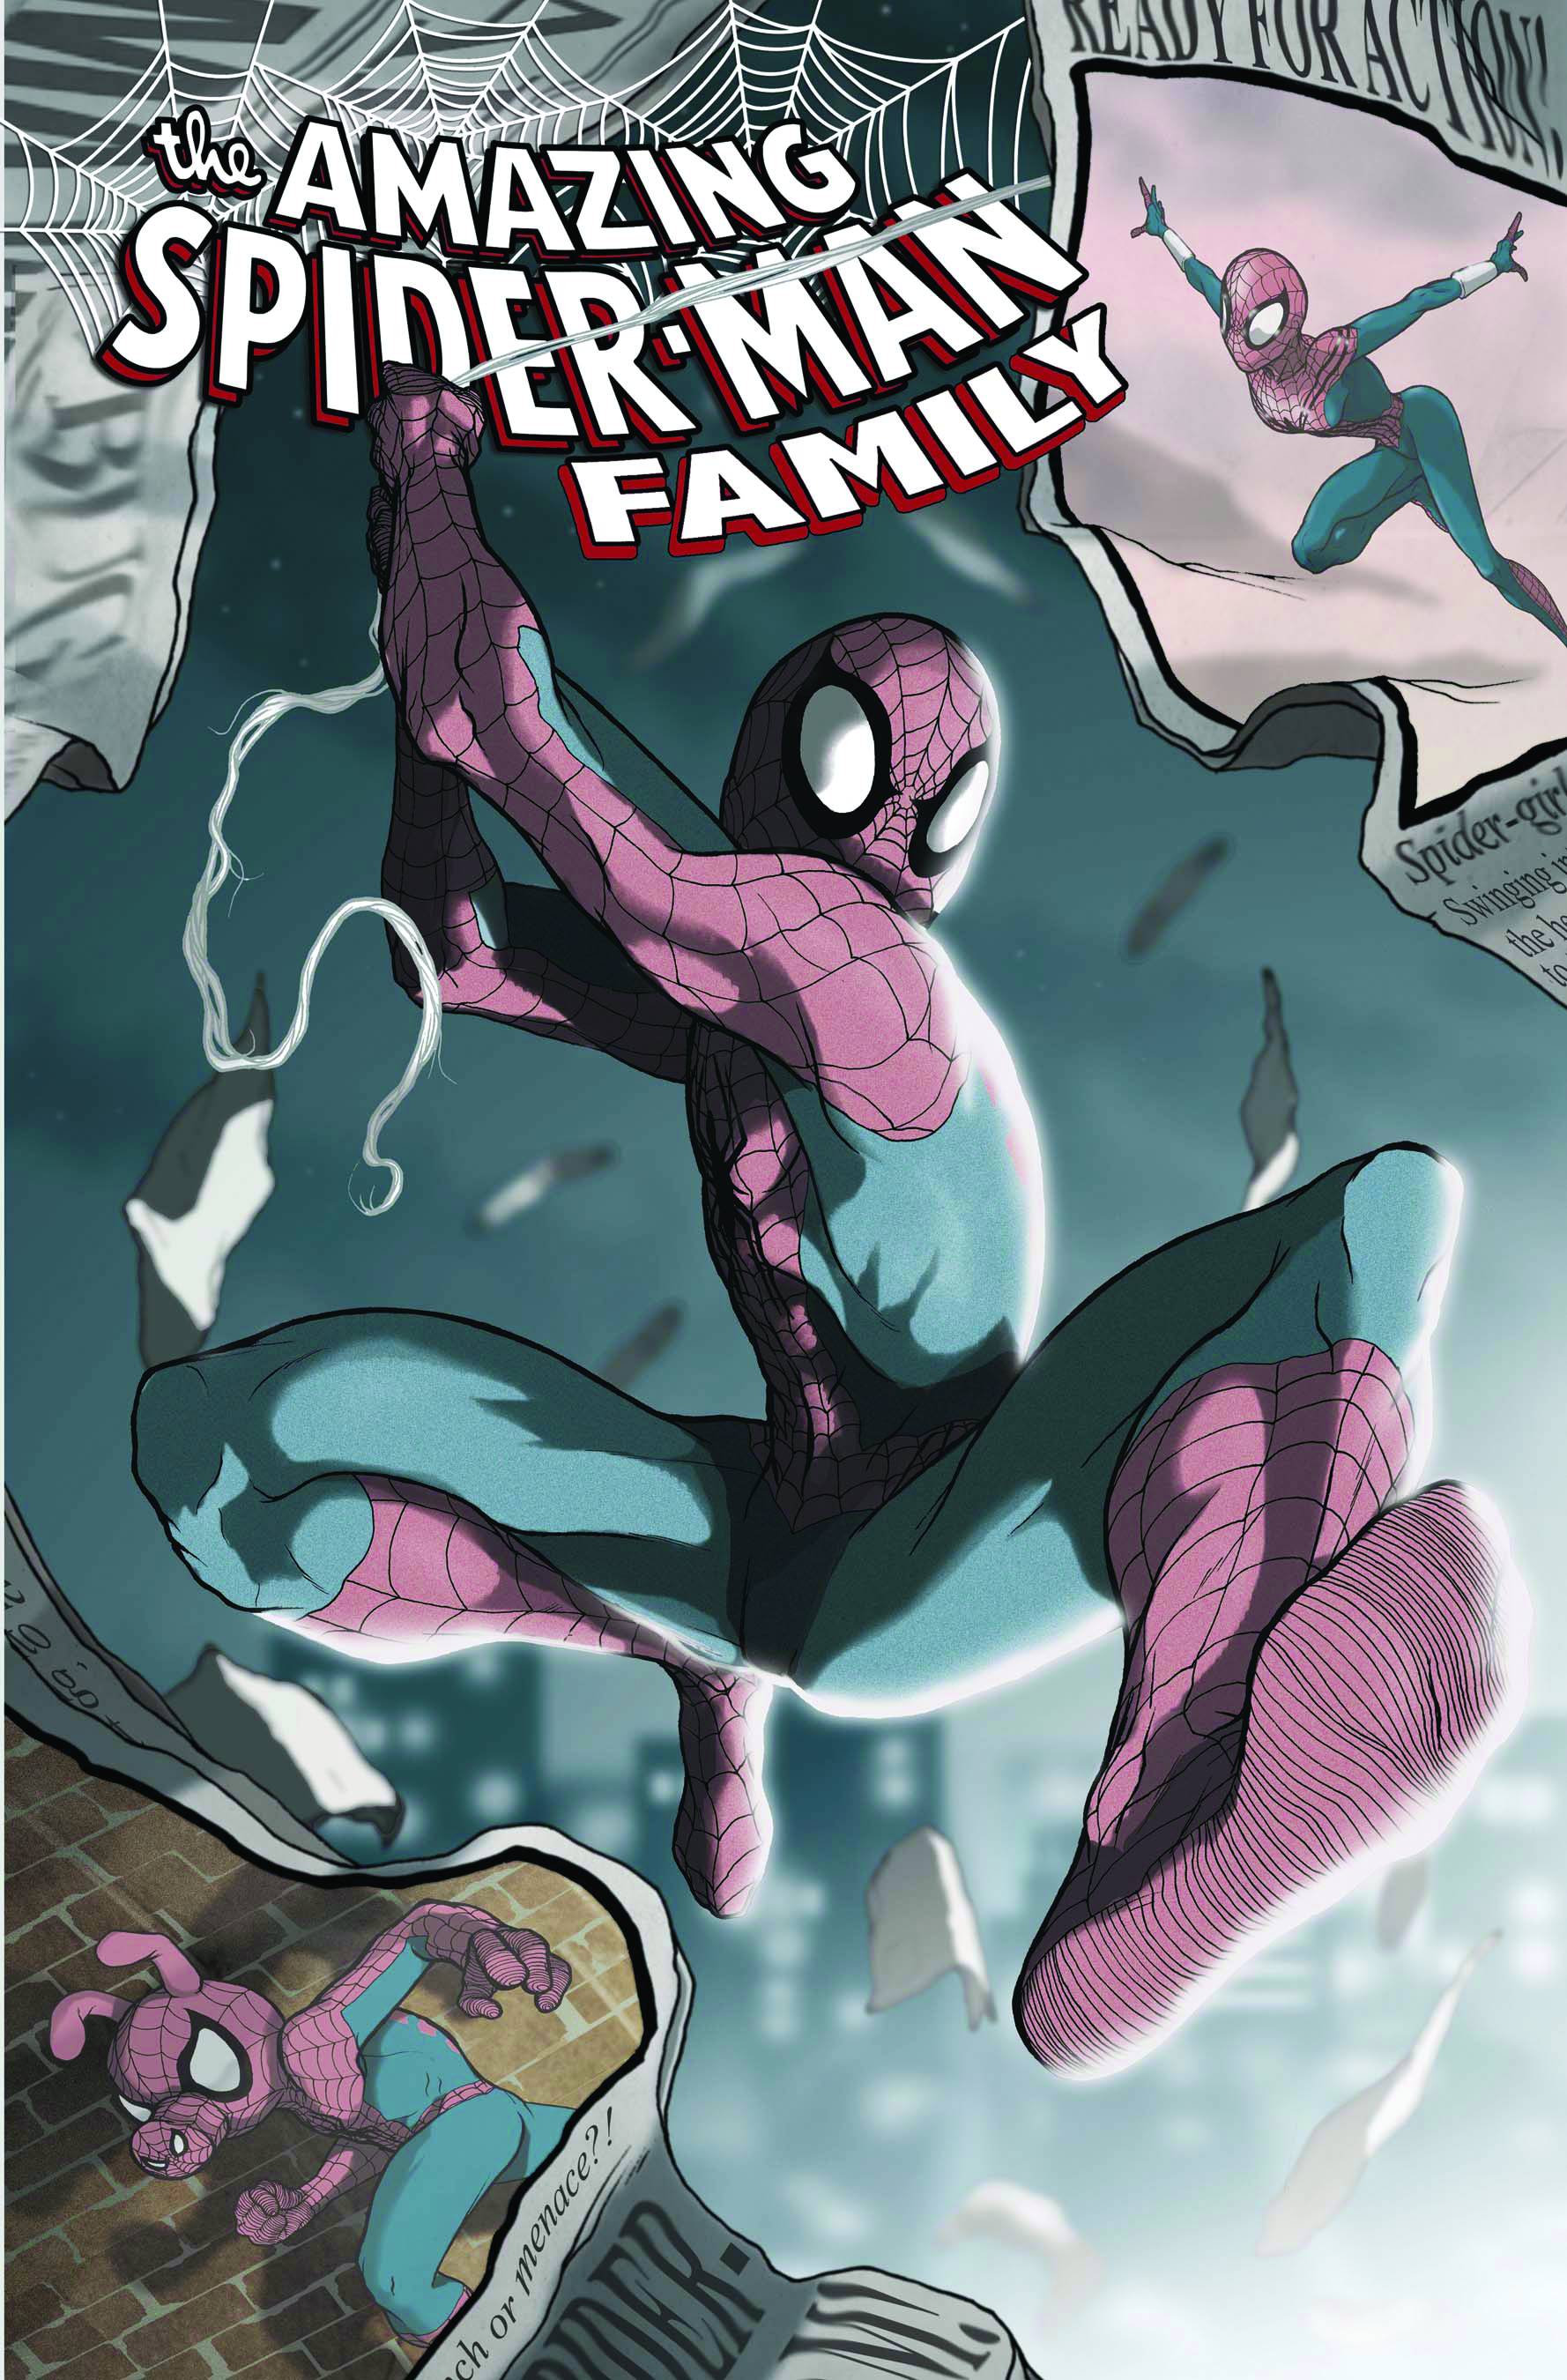 Spider-Man Family Featuring Spider-Man's Amazing Friends (2006), Comic  Series